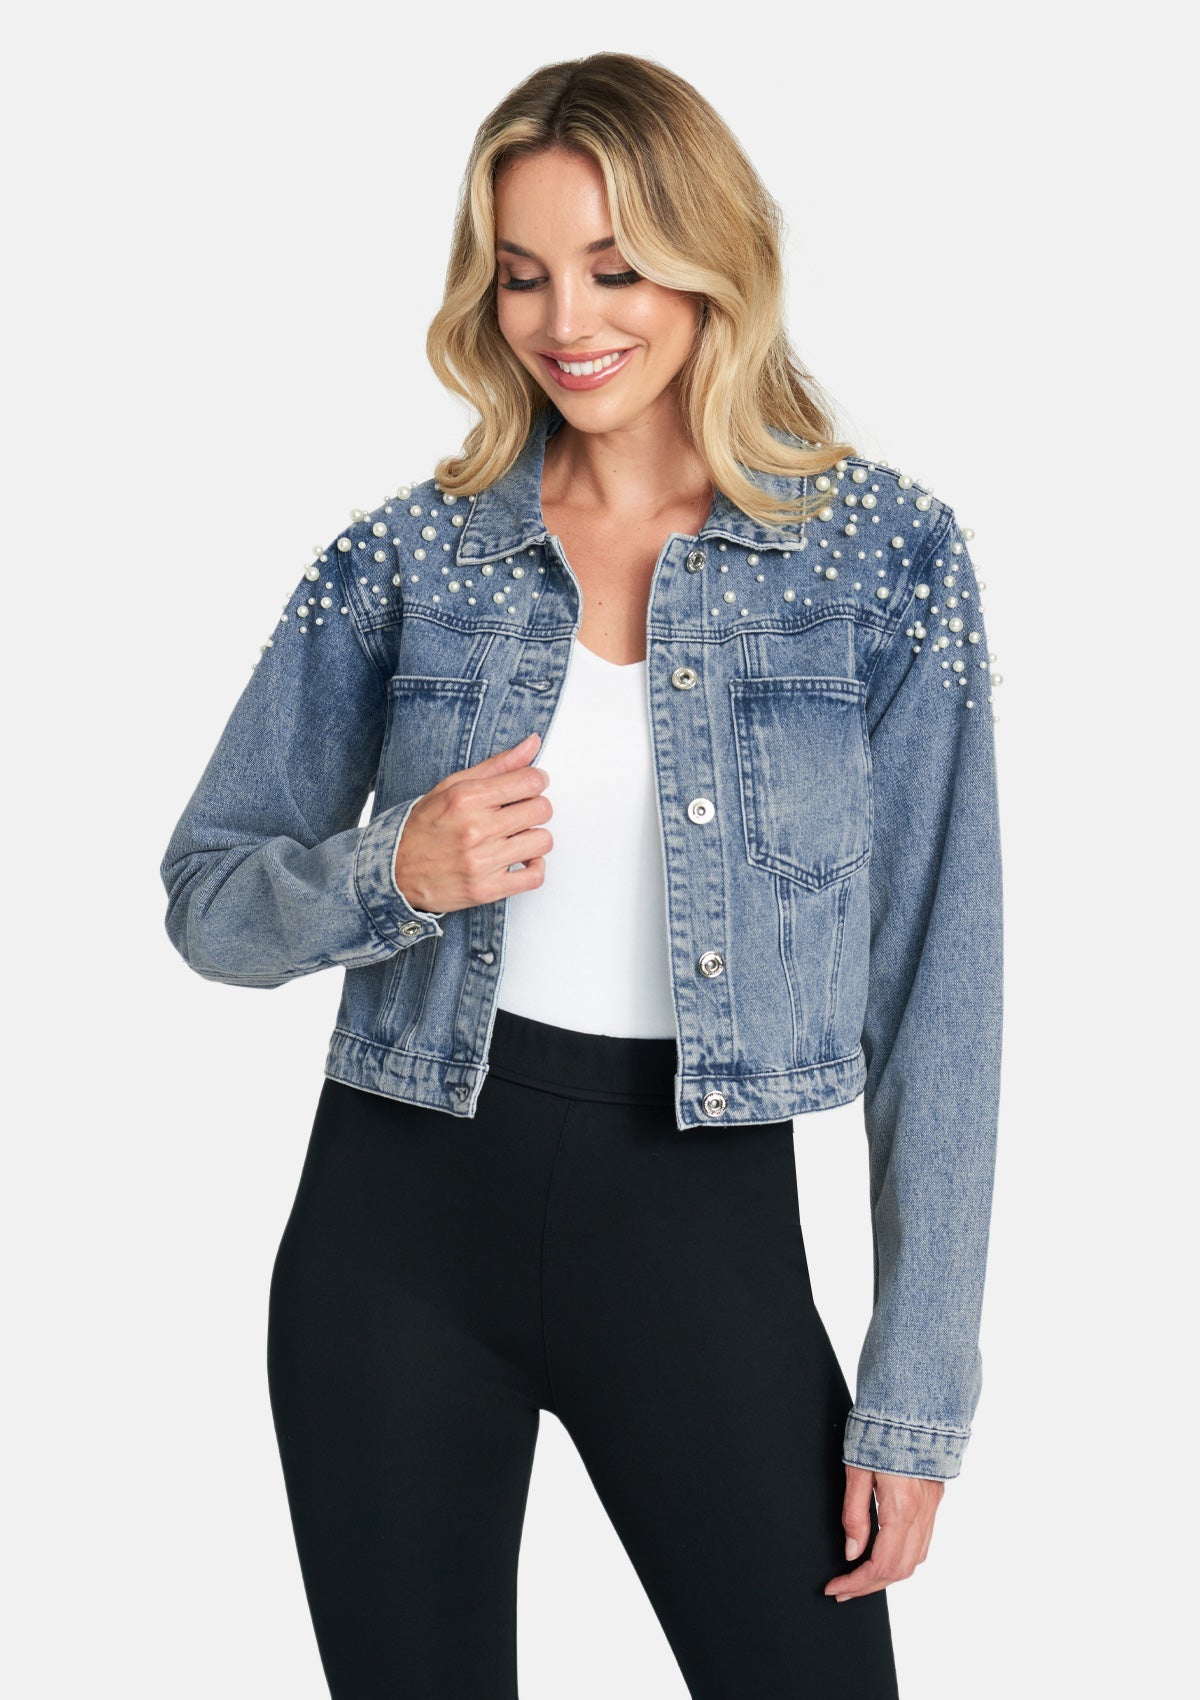 Alloy Apparel Tall Ava Embellished Denim Jacket for Women in Medium Wash Size L | Cotton